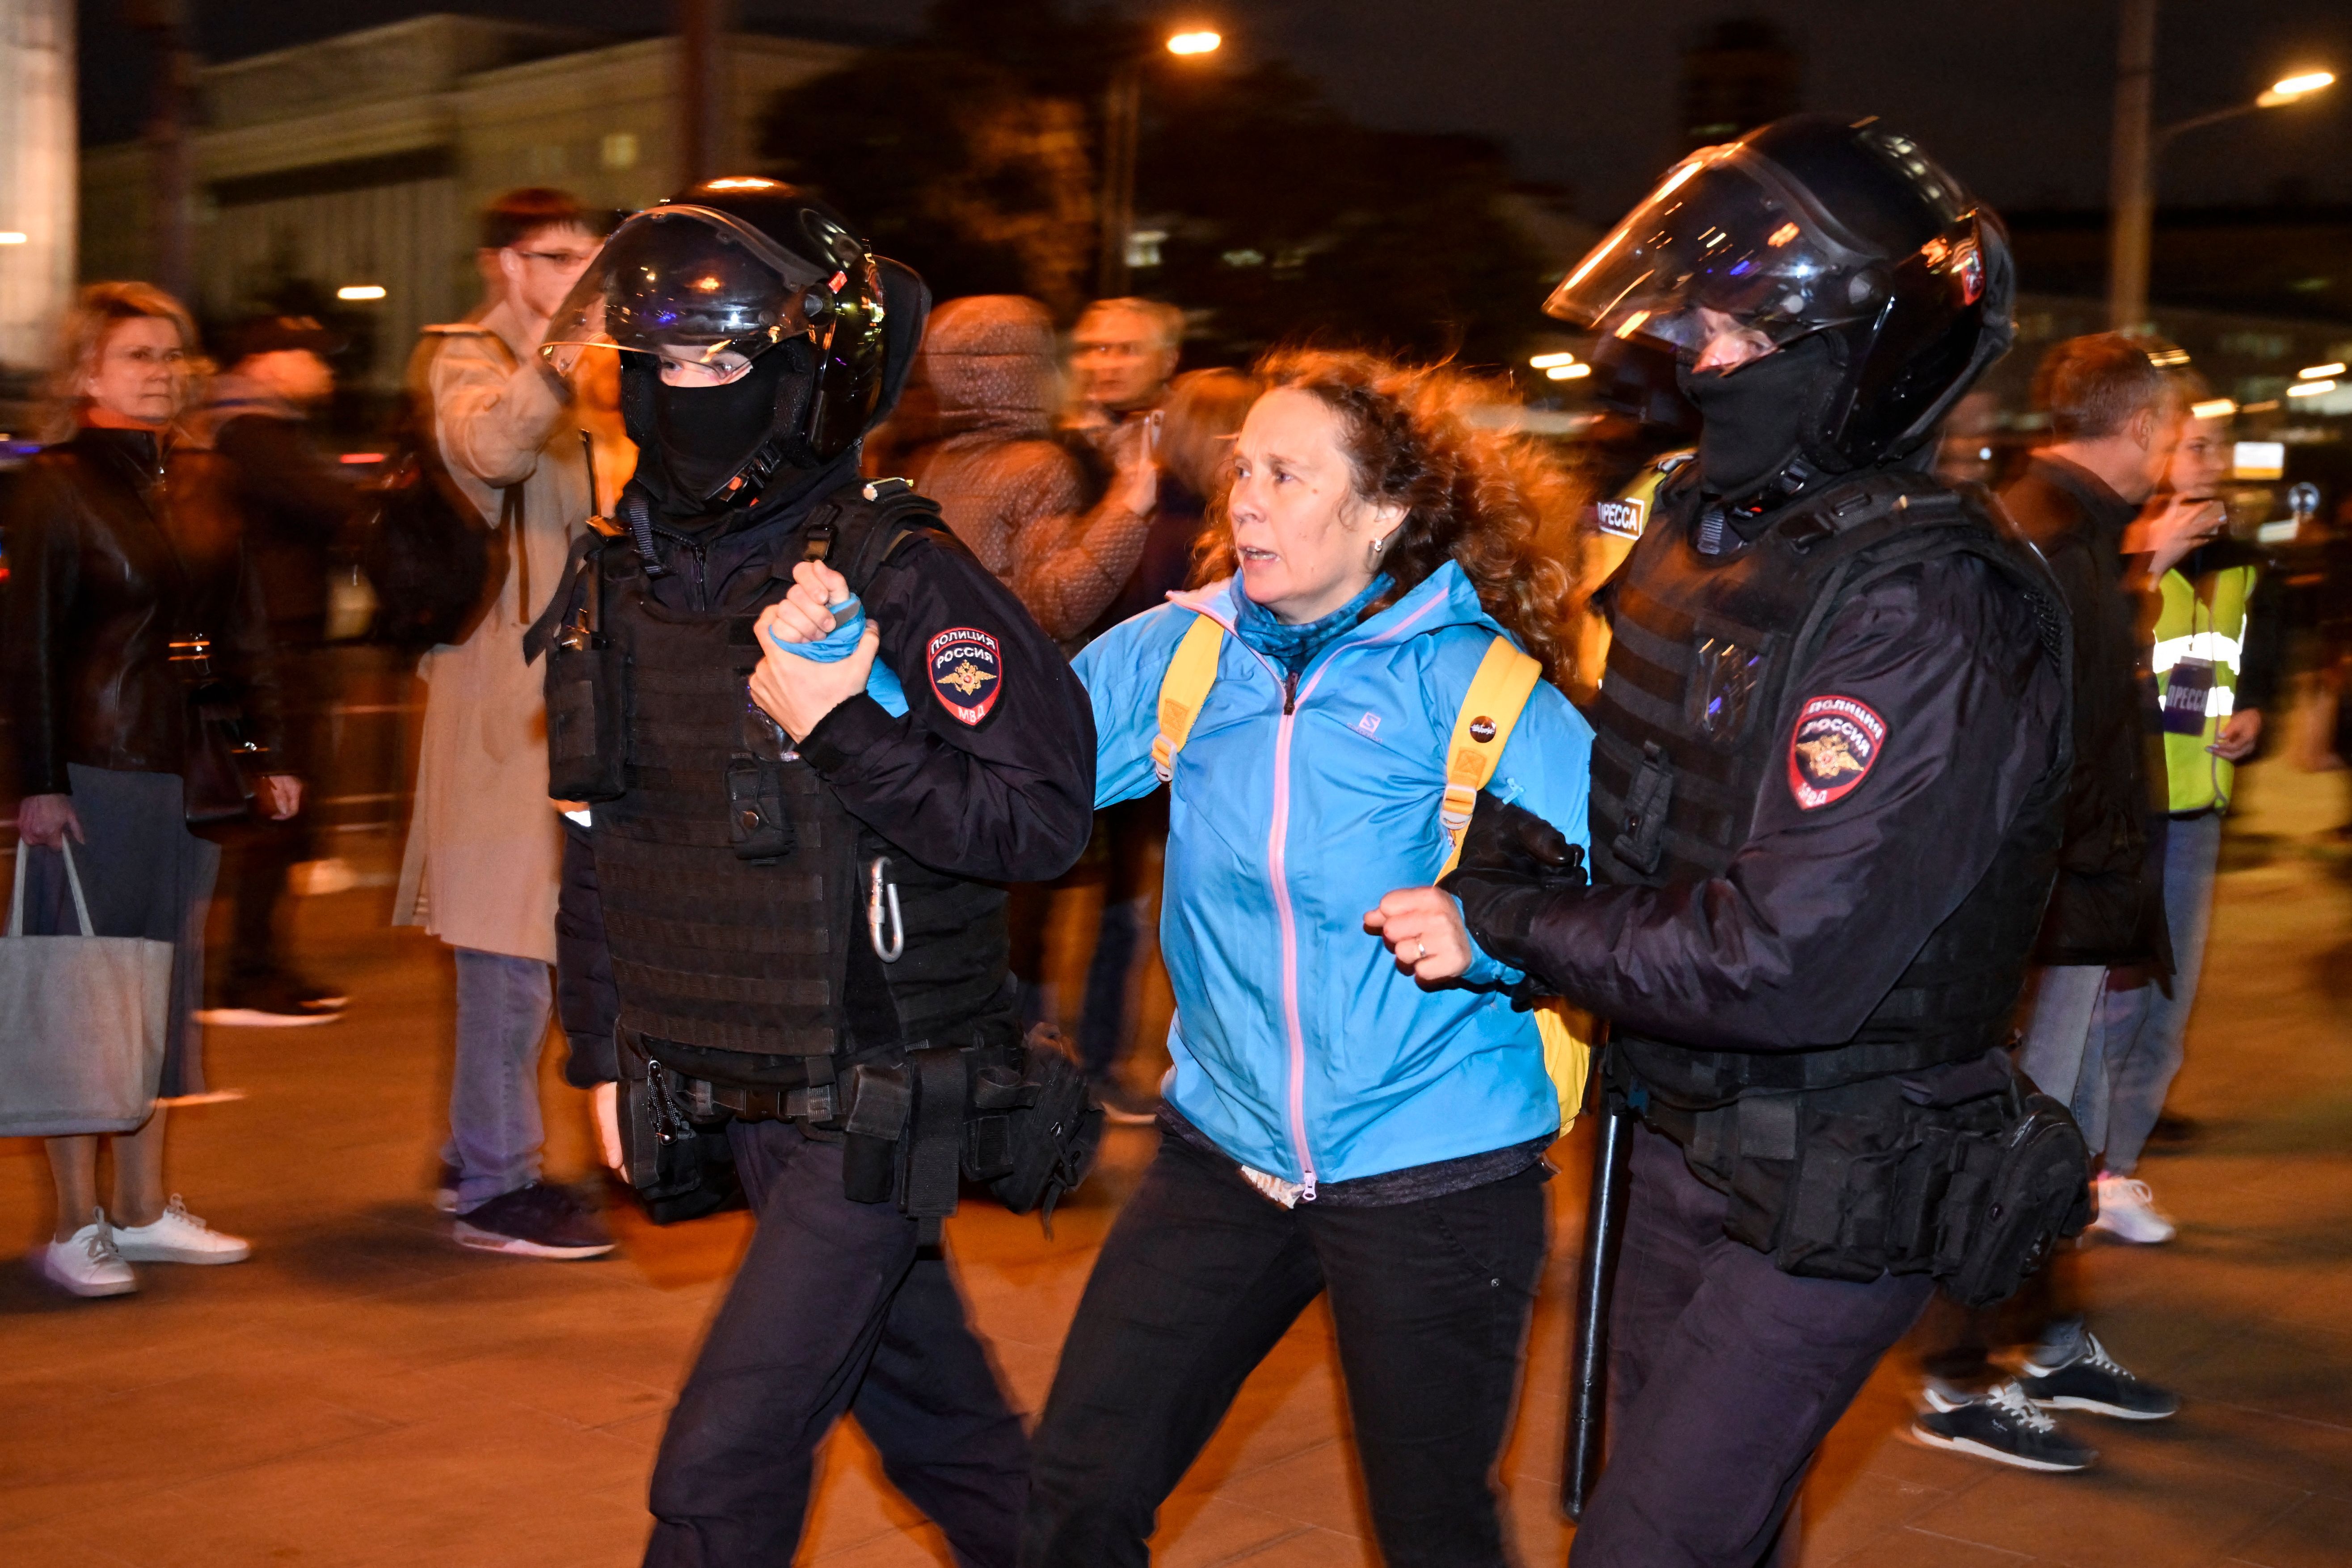 Police detaining a person in Moscow in Sept. 21.